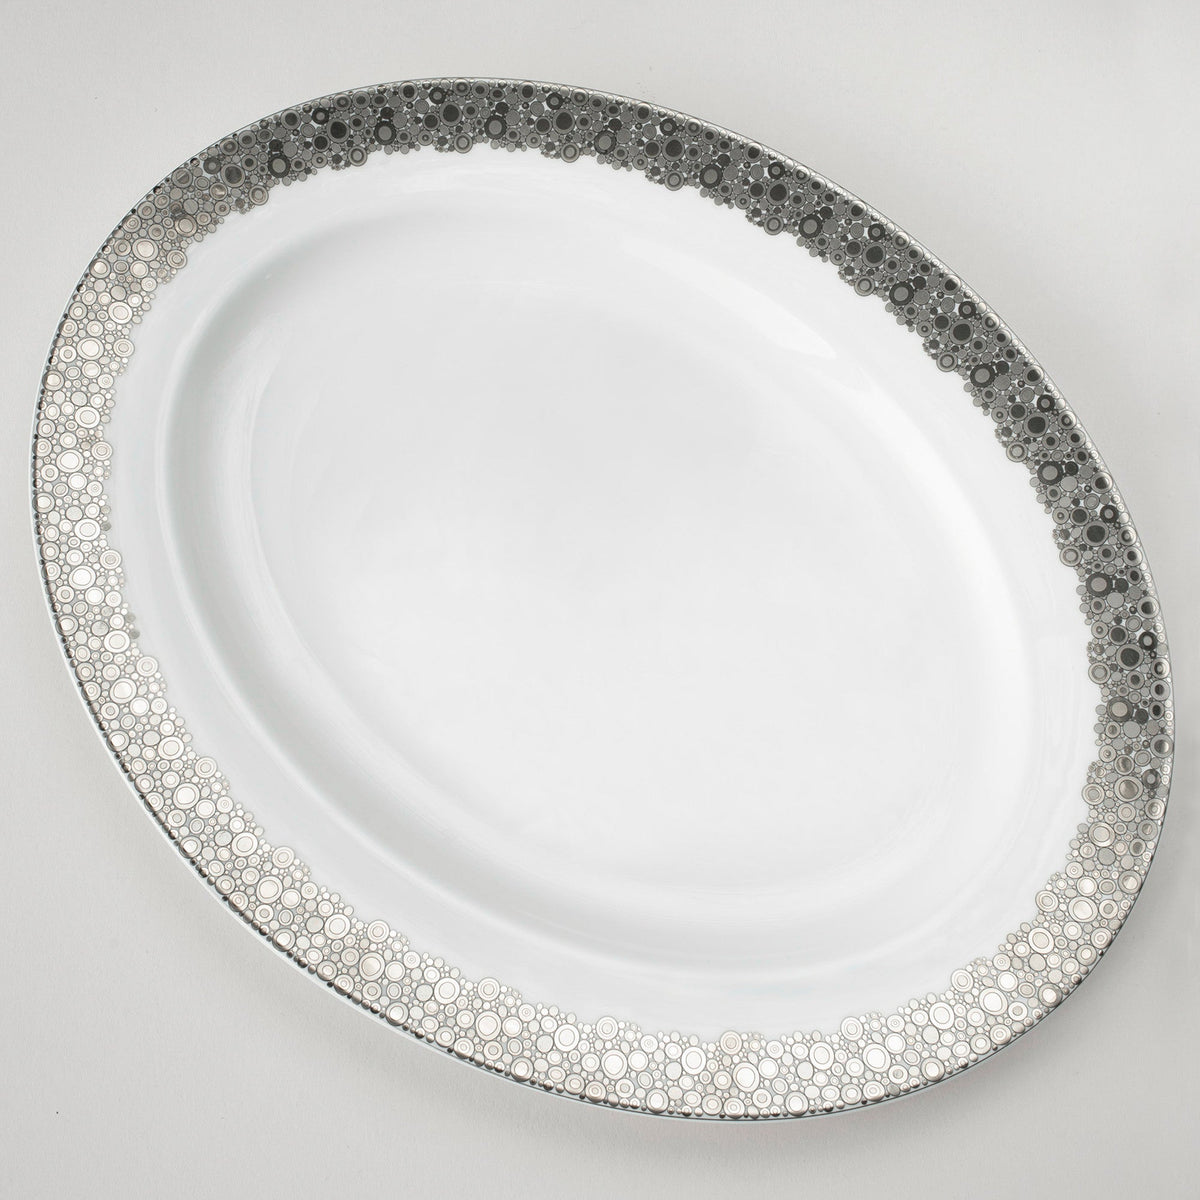 A white Ellington Shine Platinum Oval Rimmed Platter from Caskata Artisanal Home with a black and platinum pattern.